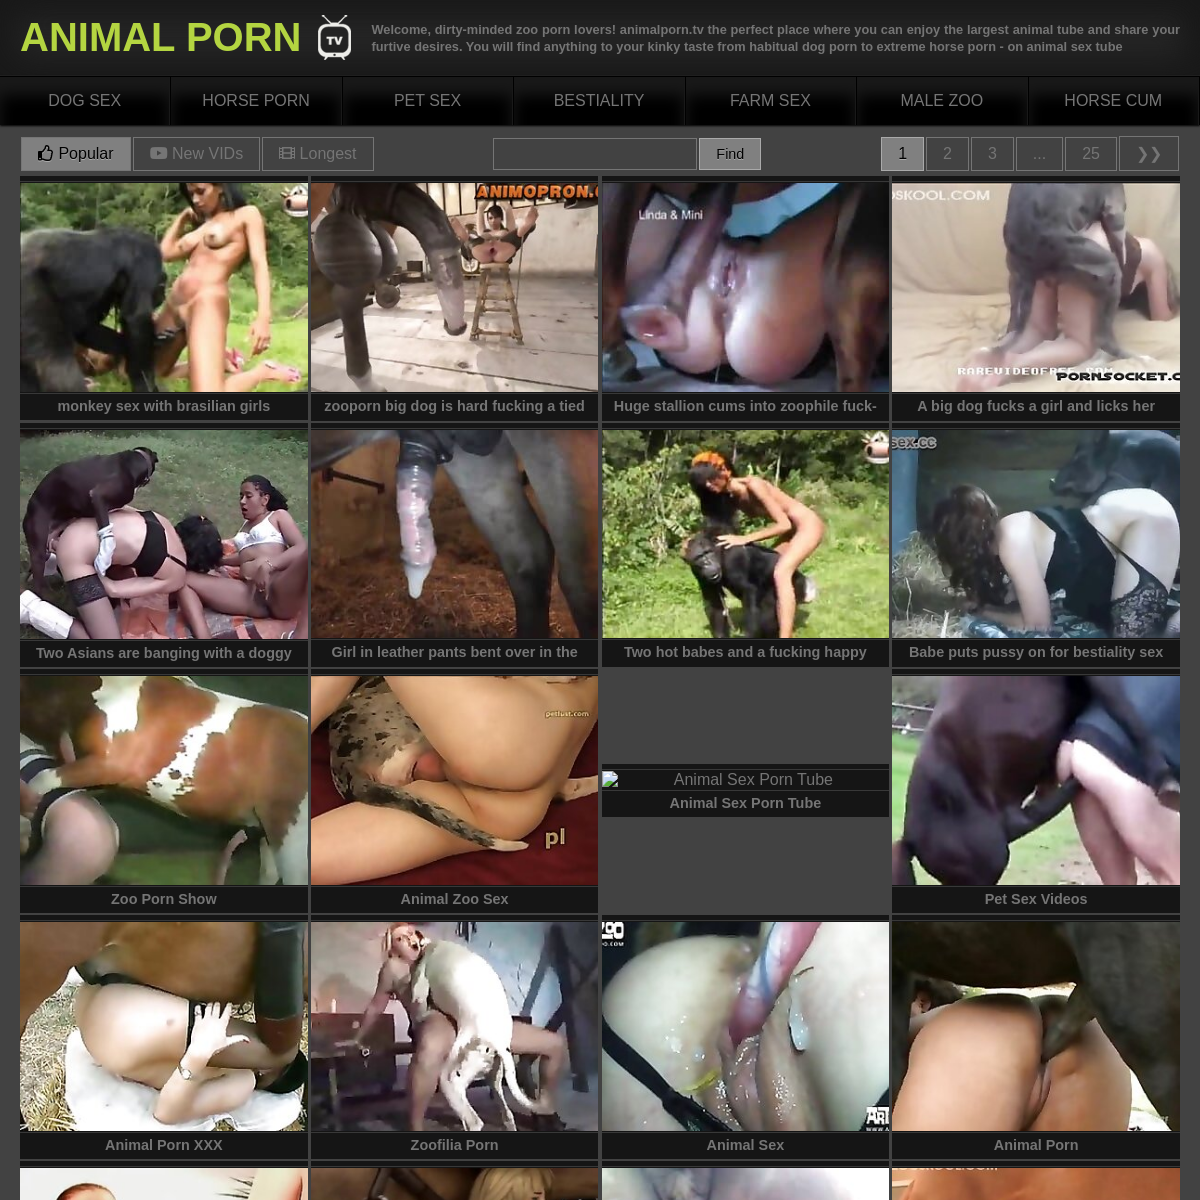 A complete backup of www.animalporn.tv